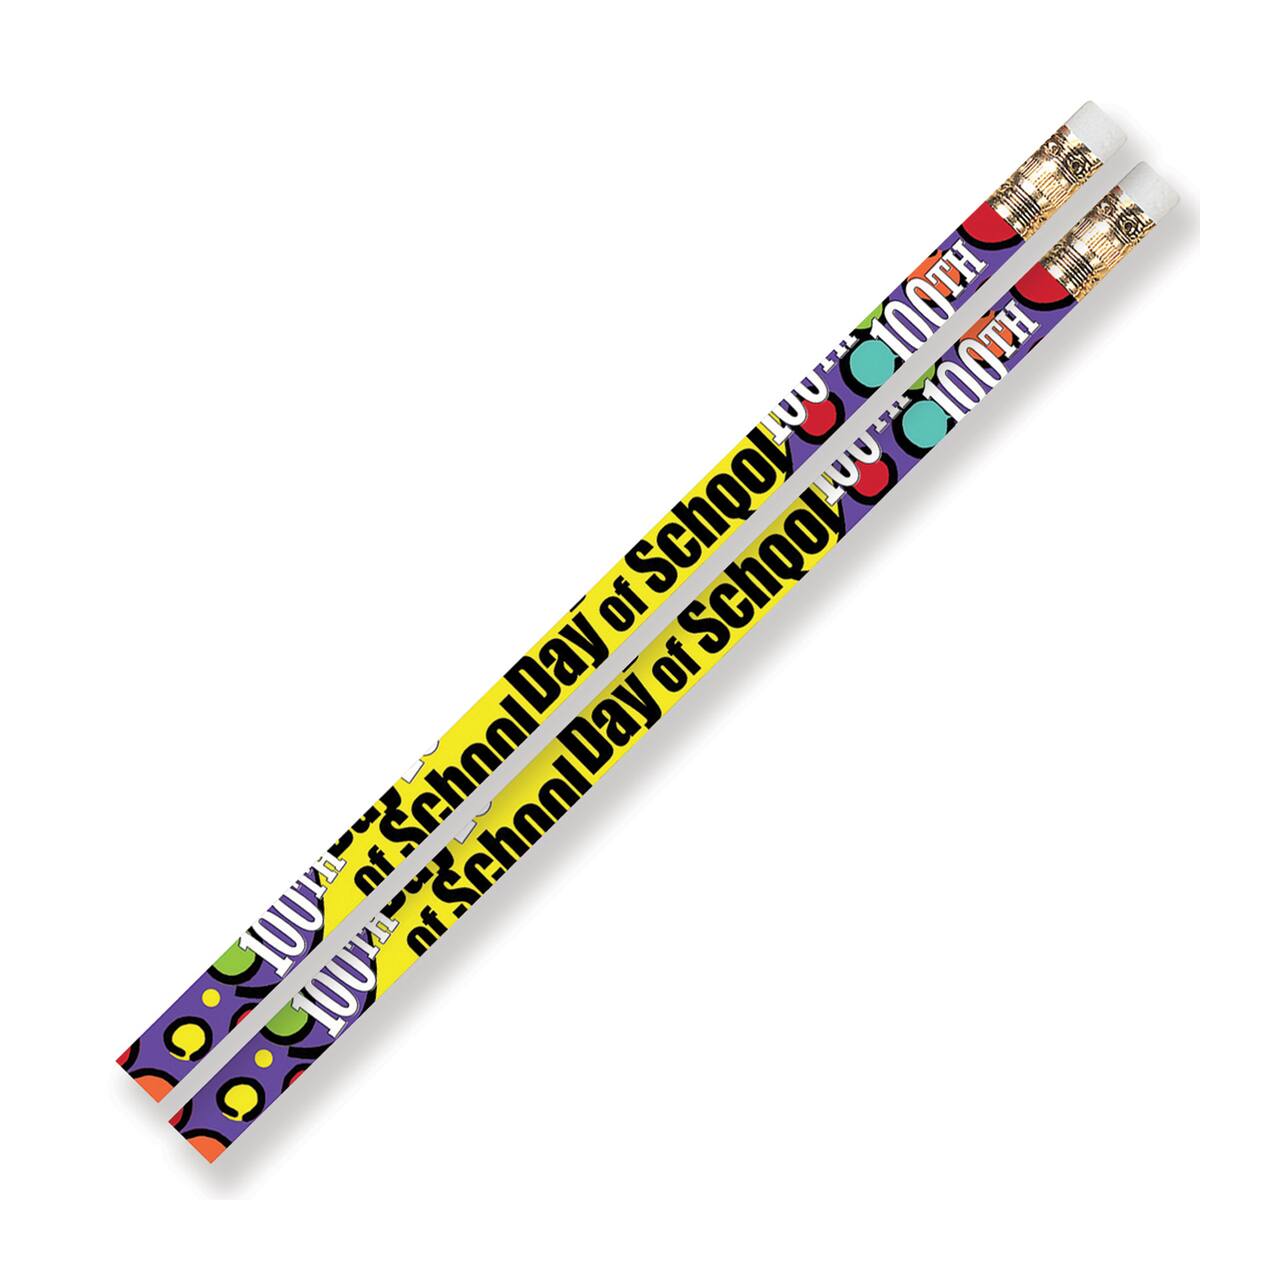 Musgrave Pencil 100th Day Of School Motivational Pencils, 144 Pack